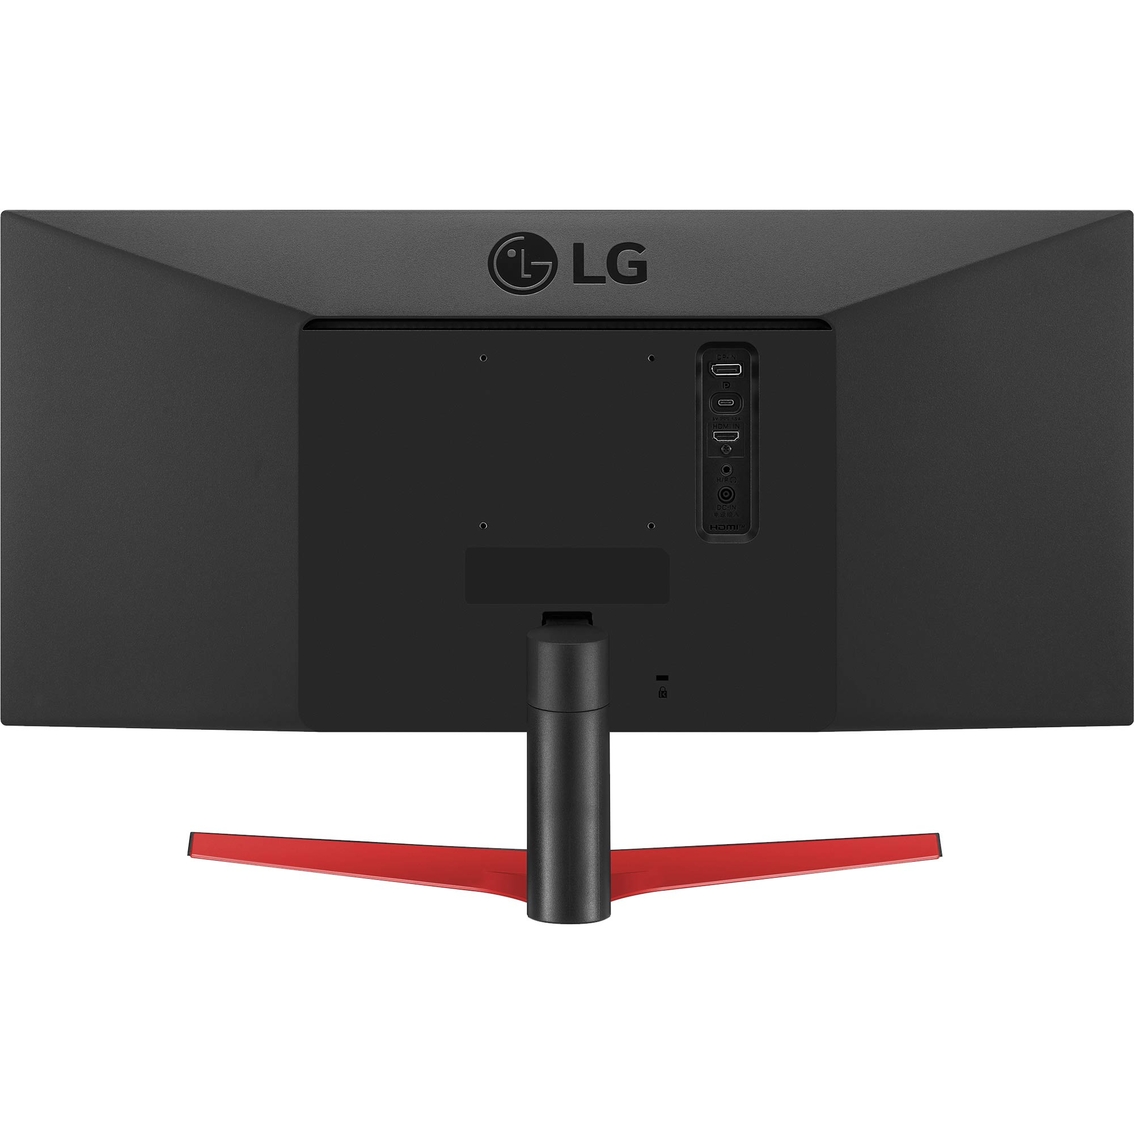 LG 29 in. UltraWide FHD HDR FreeSync Monitor 29WP60G-B - Image 6 of 7